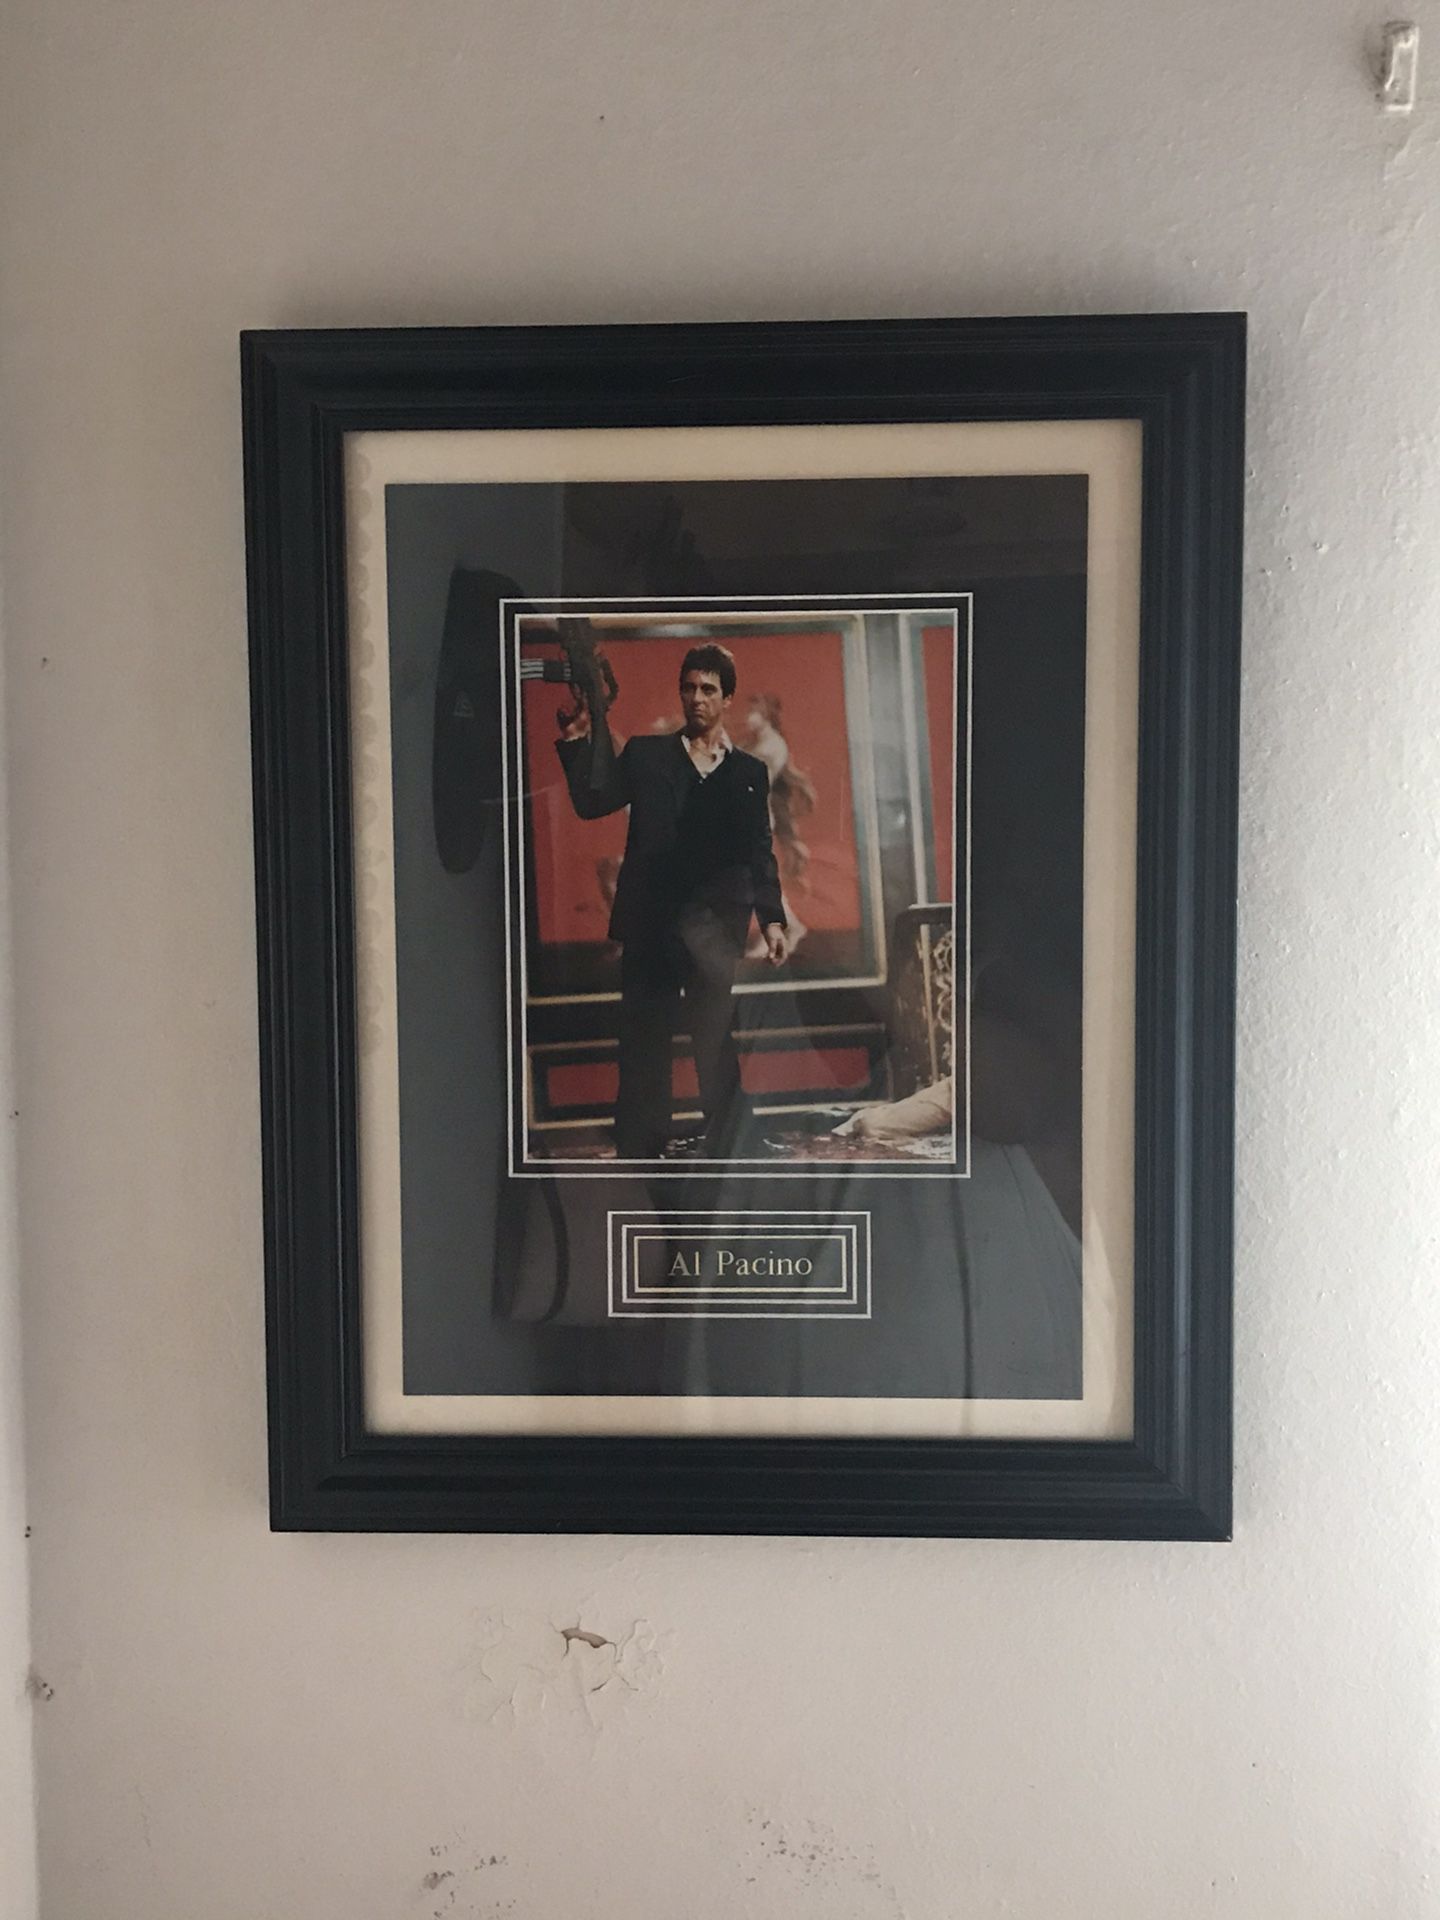 Make me an offer on this picture frame of SCARFACE